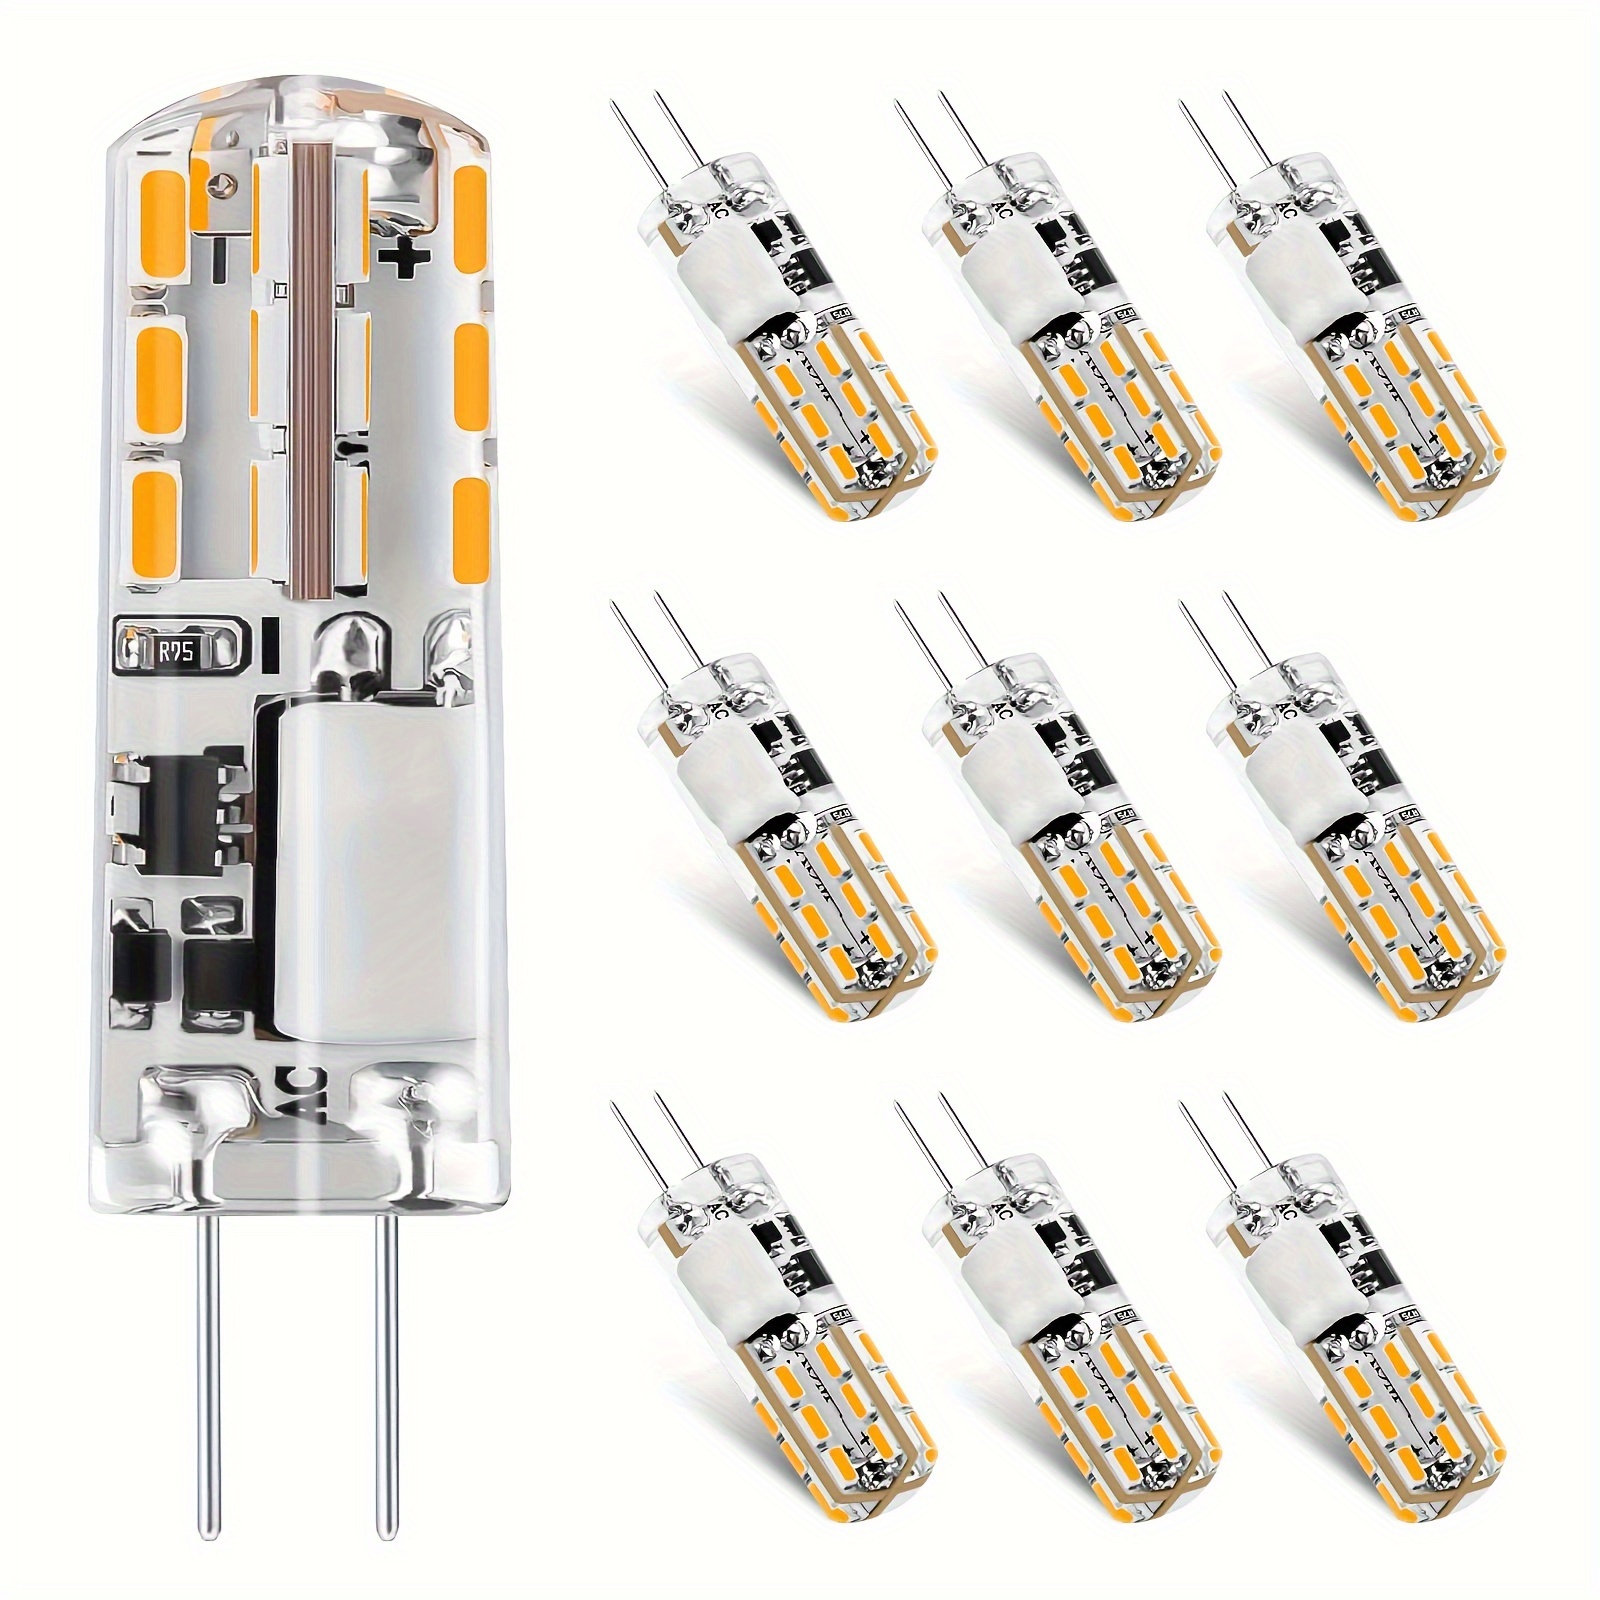 

10pcs, G4 Led Bulbs, 1w Ac/dc 12v Bi-pin Base, Warm White 2700k - 3000k, Cool White 6000k, Non-dimmable, Suitable For Chandeliers Table Lamps Bedside Lamps Wall Lamps Crystal Lamps